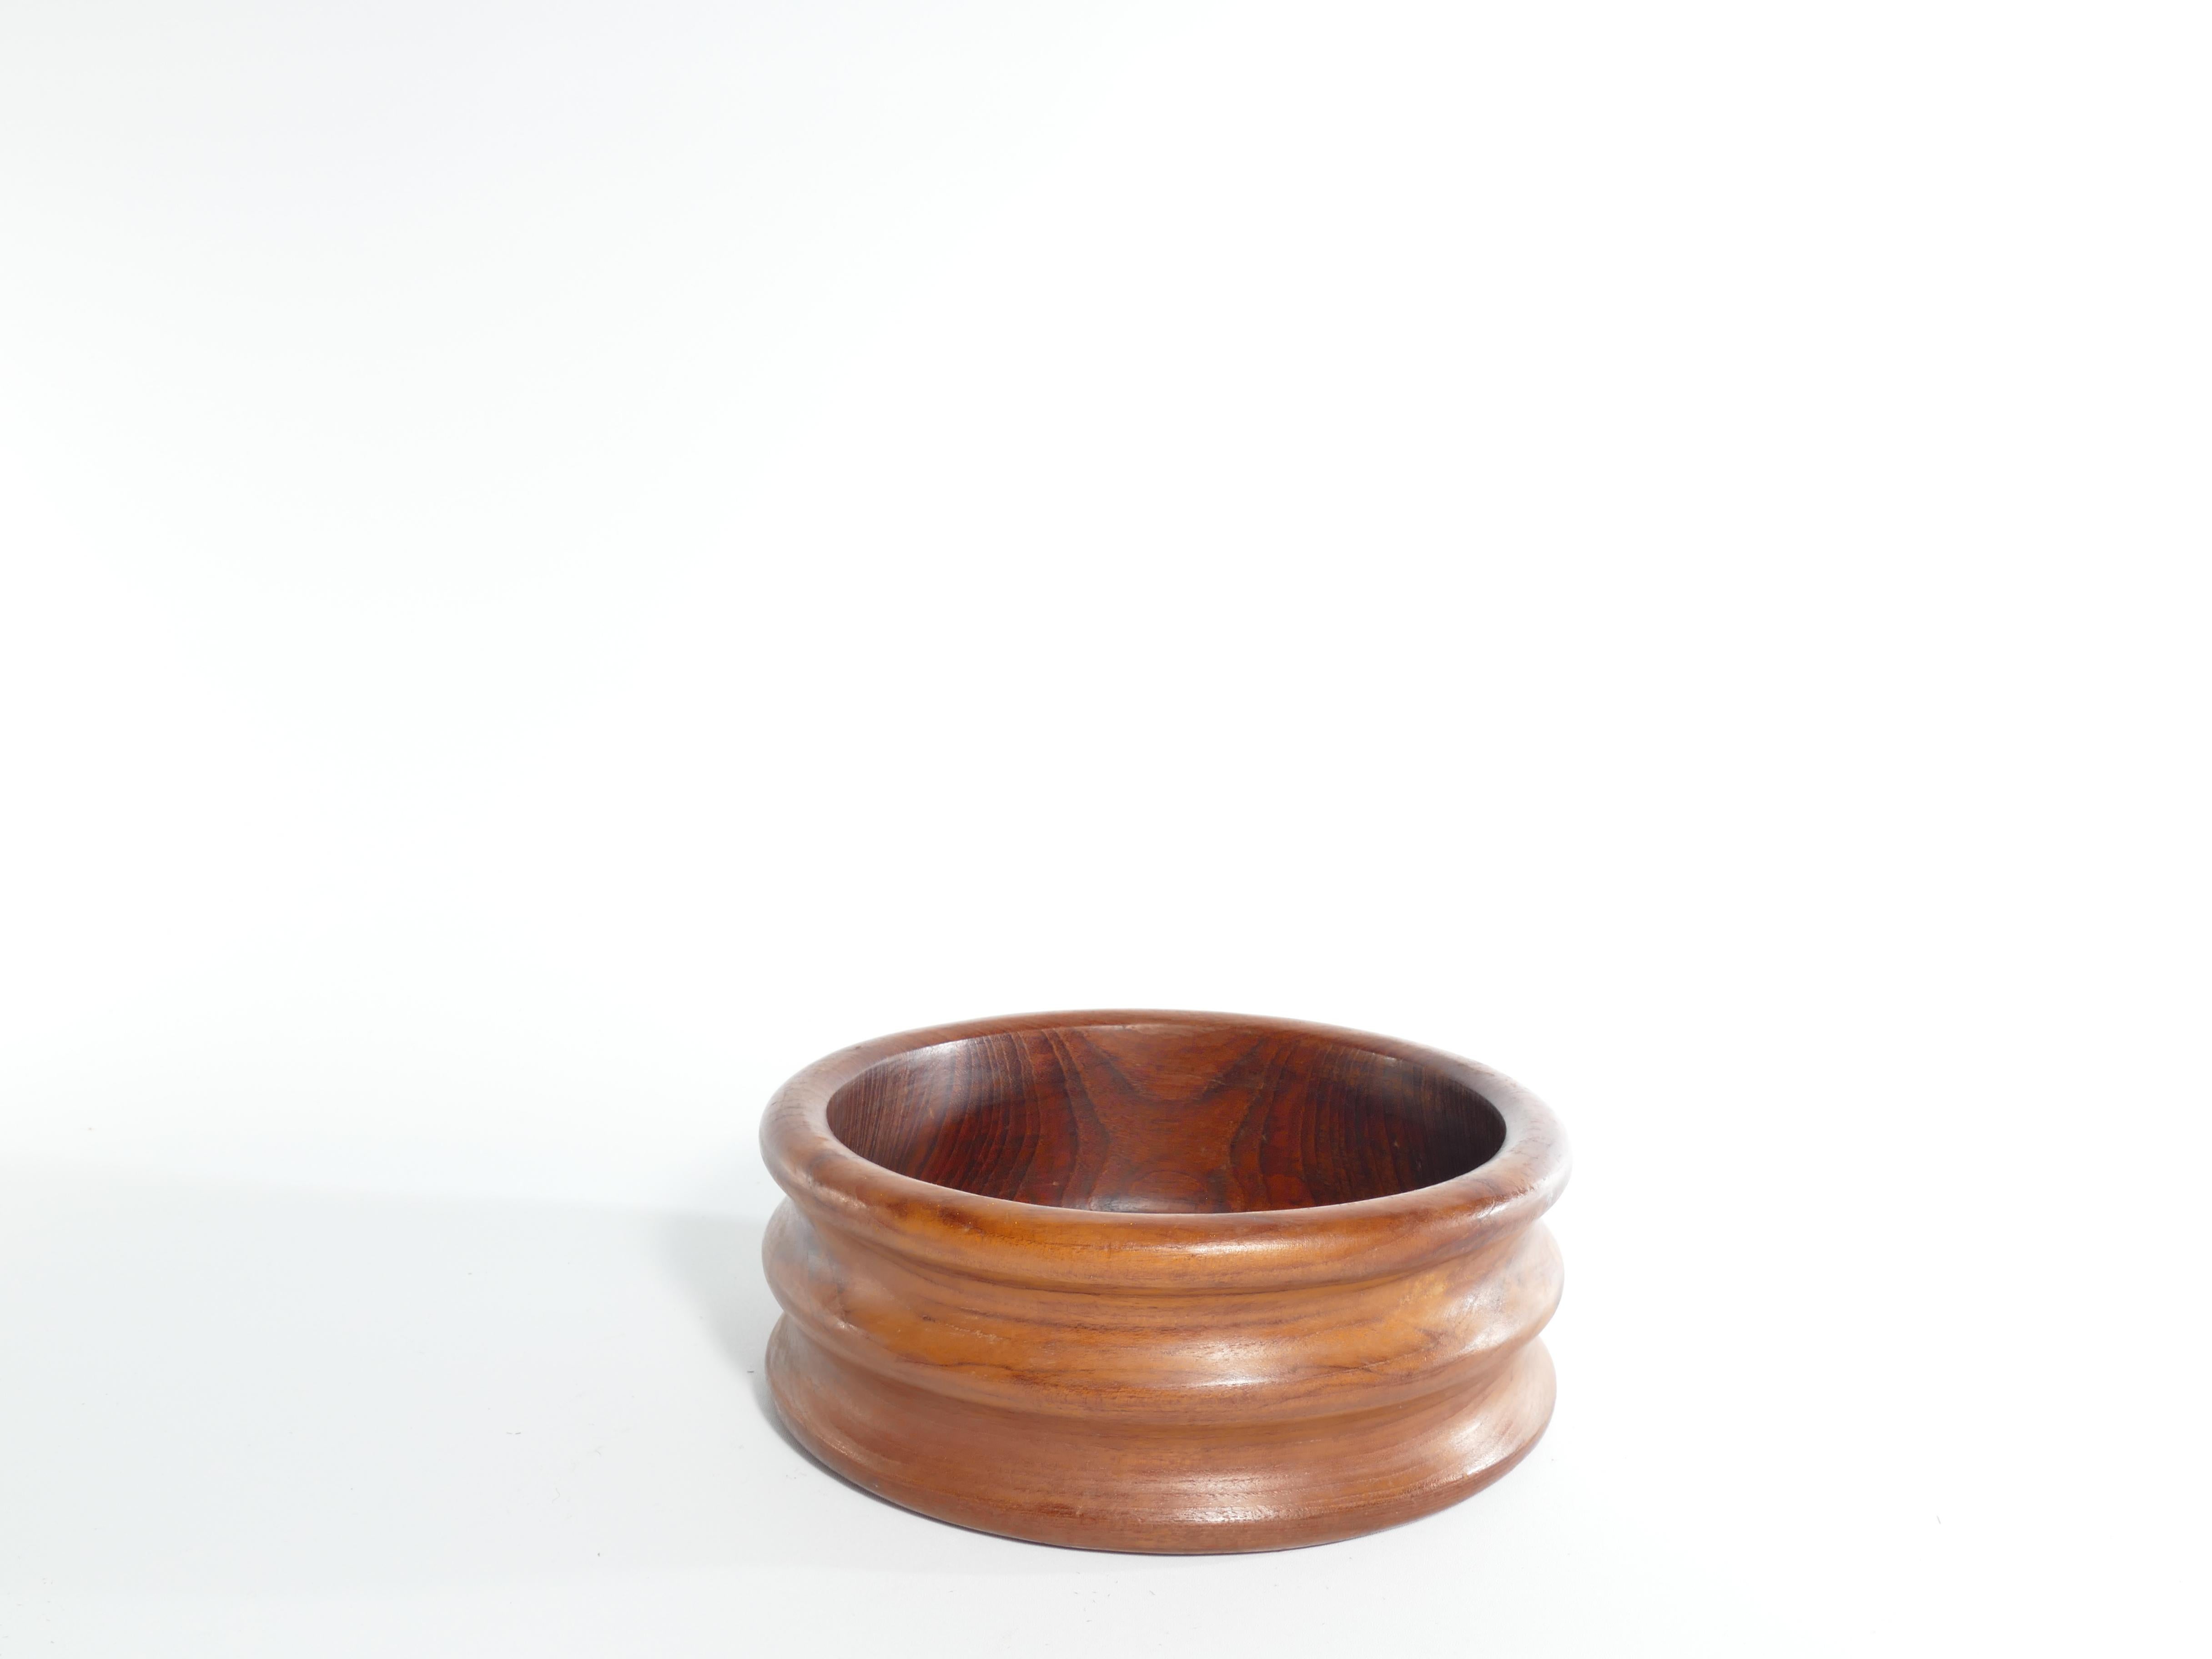 A very stylish mid-century modern teak wood bowl by Dolphin, Thailand. Whether displayed as a standalone art piece or used practically to hold fruits, decorative accents, or even as a conversation-starting centerpiece, this bowl is a true embodiment